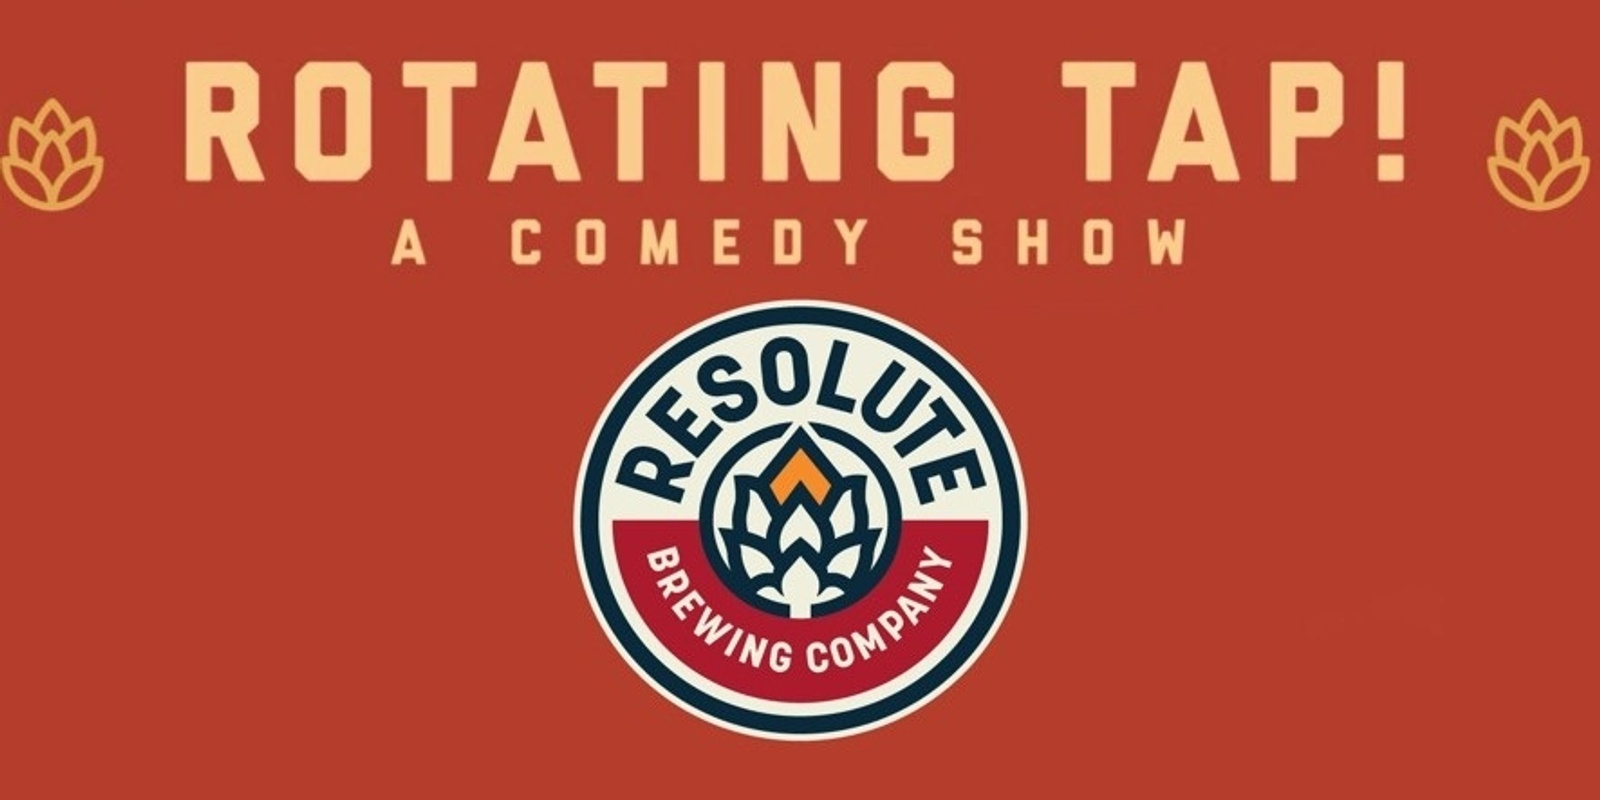 Rotating Tap Comedy @ Resolute Brewing Tap & Cellar